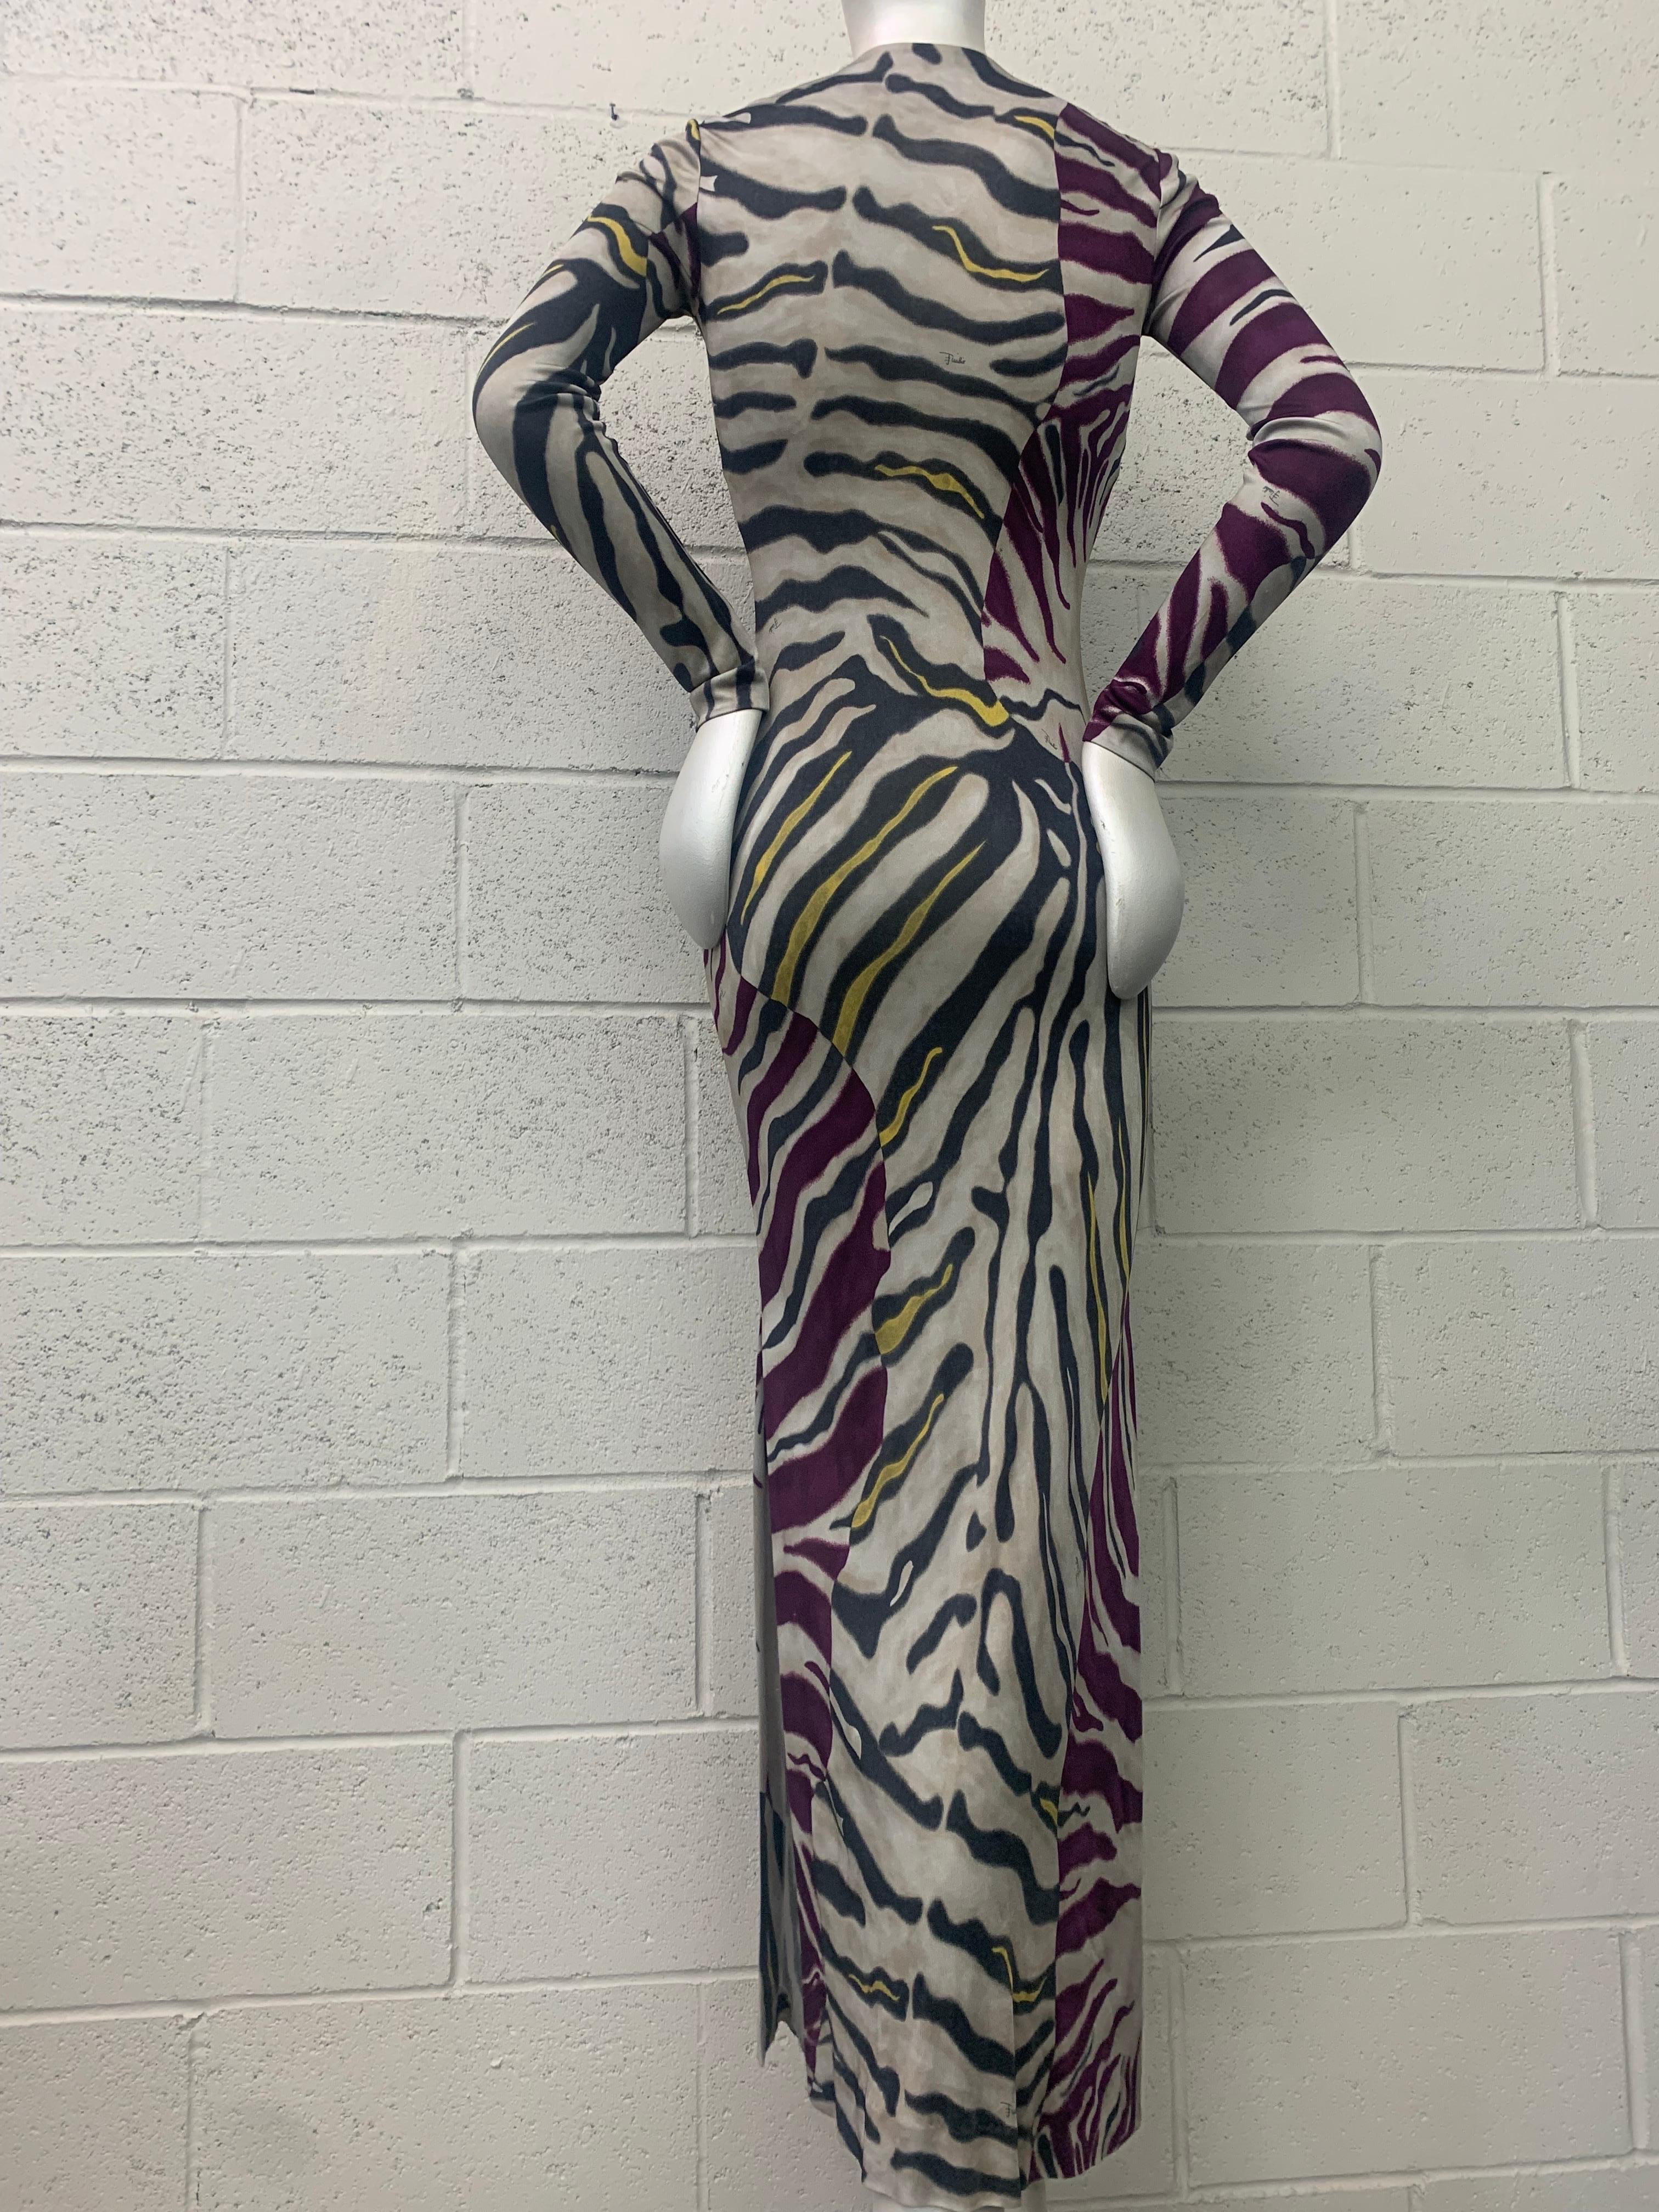 Emilio Pucci Stylized Zebra-Print Body-Conscious Beaded Maxi Dress in Rayon Knit:  Long-sleeved with a high side slit this exotic number is beaded in a cloverleaf design at neckline.  Hook and eye at center front neckline is the only closure--slips